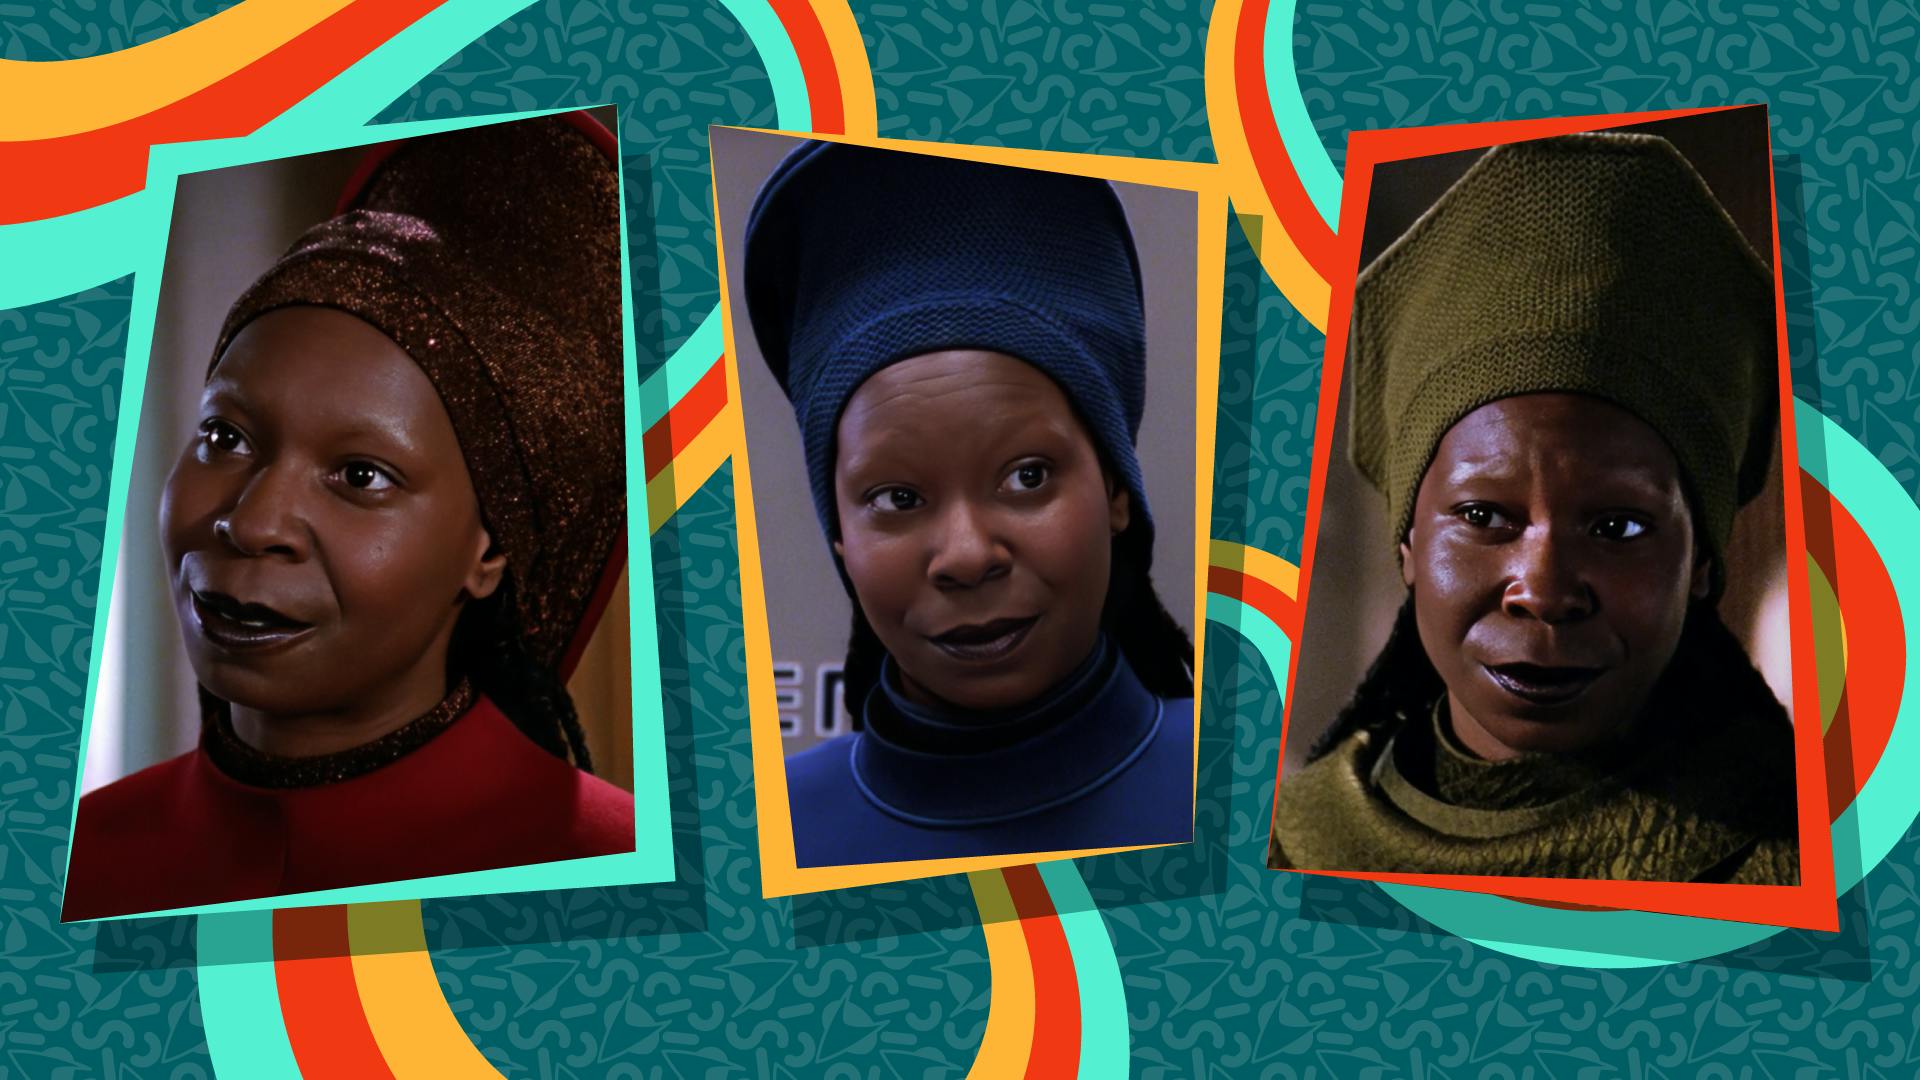 Illustrated triptych featuring three Guinan episodic stills from Star Trek: The Next Generation